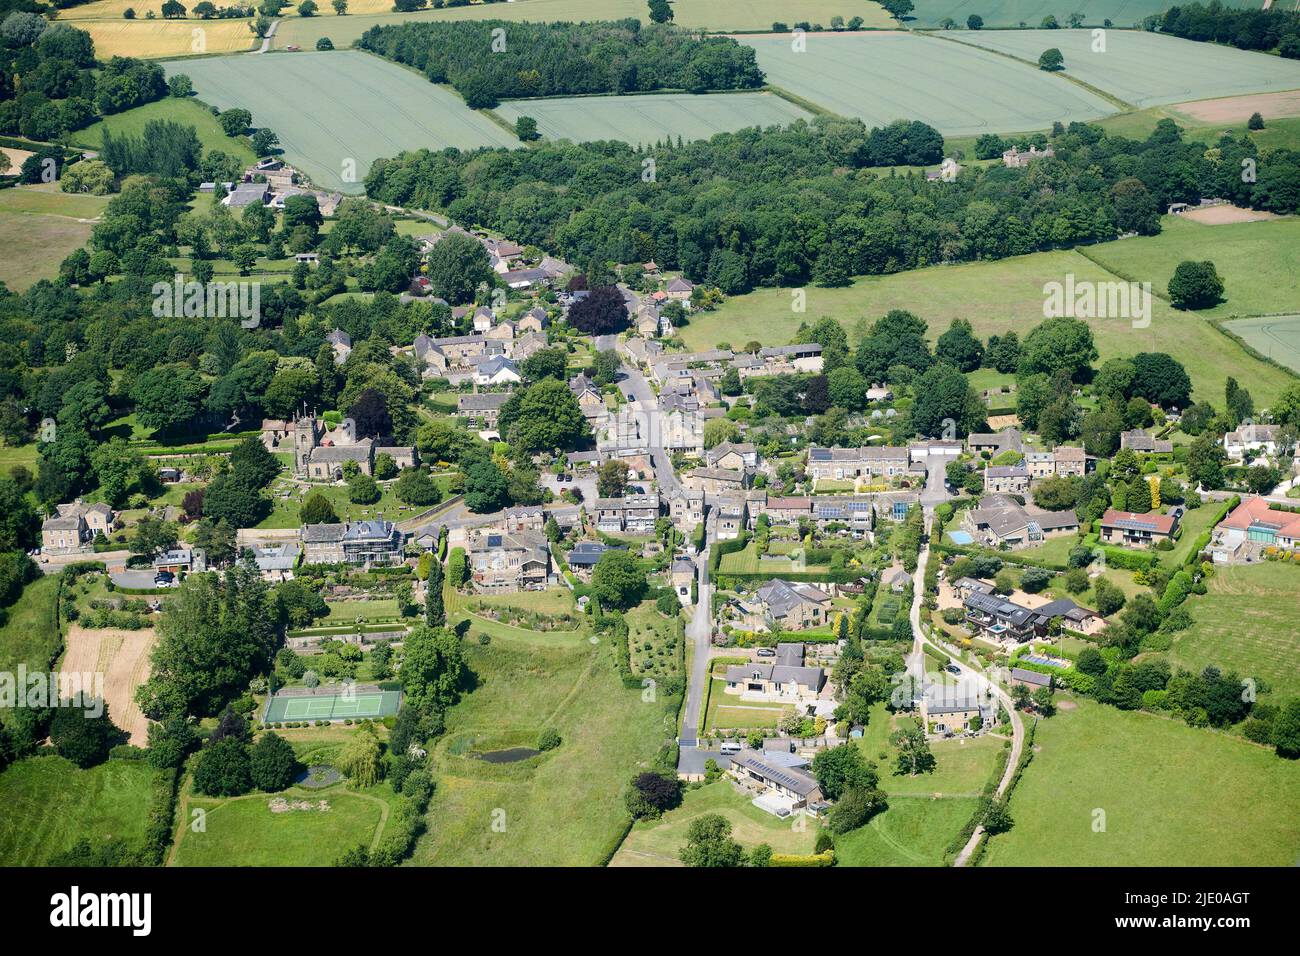 An aerial view of Kirby Overblow Harrogate, North Yorkshire, Northern England, UK Stock Photo